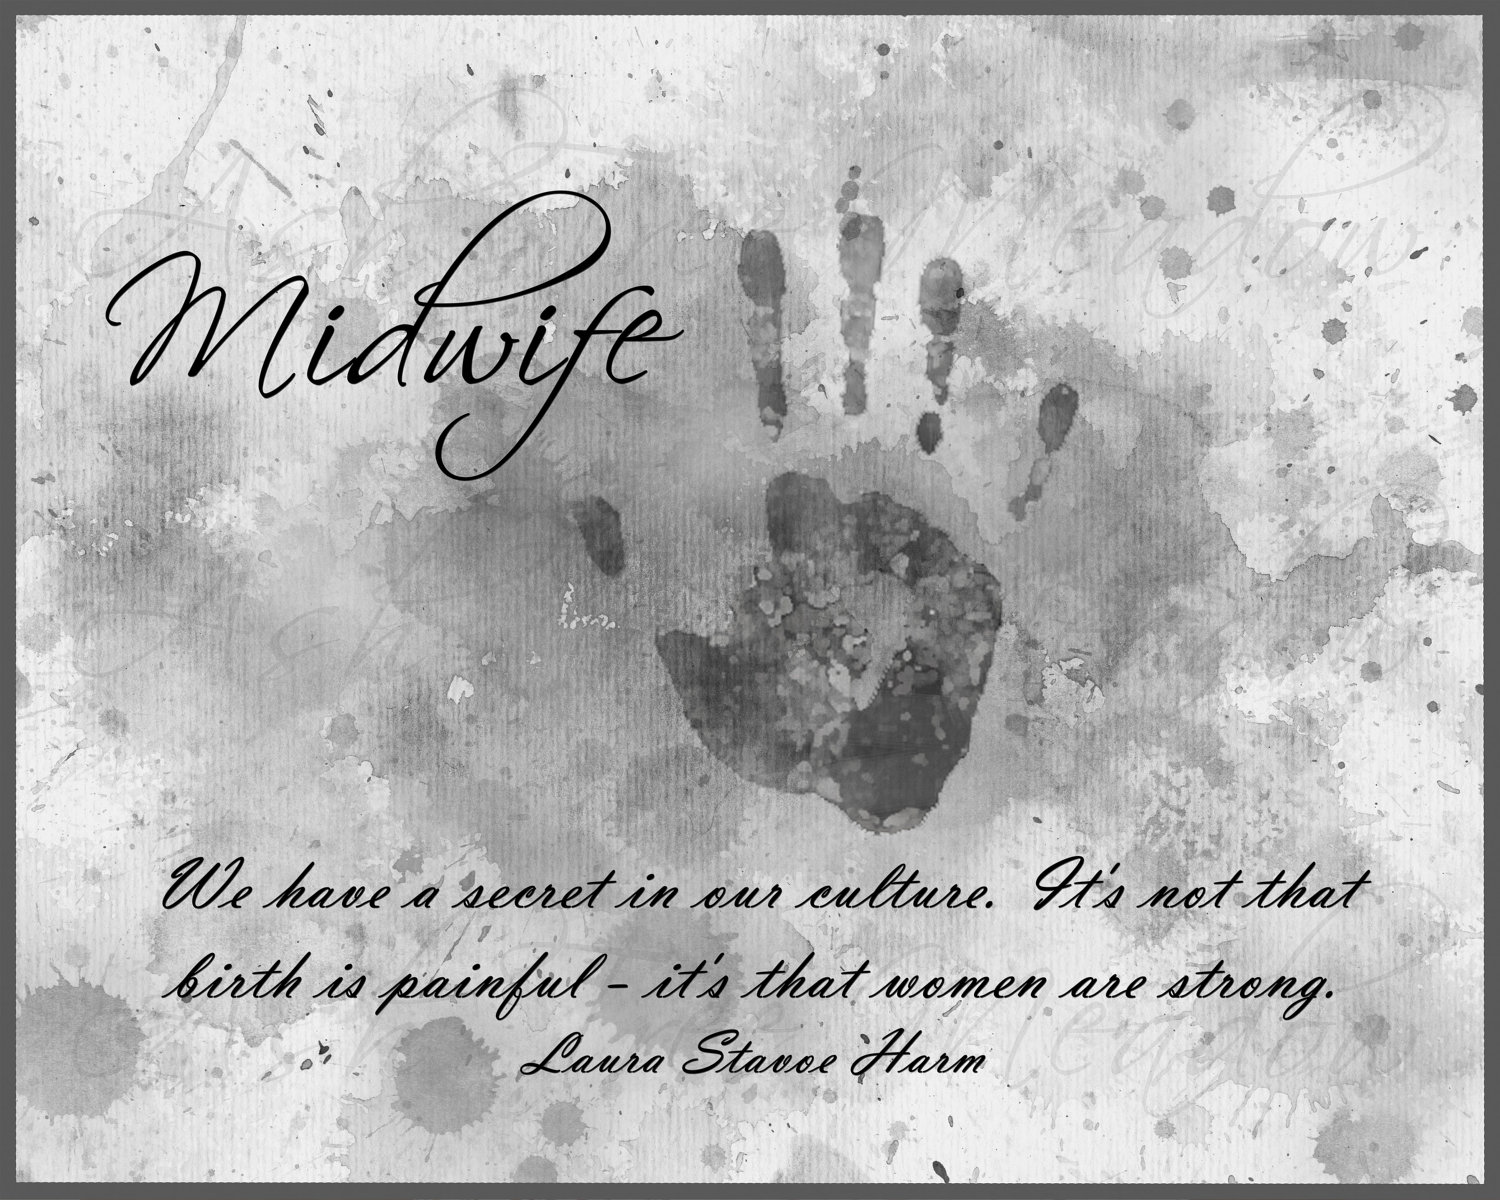 More of quotes gallery for "Midwife" .